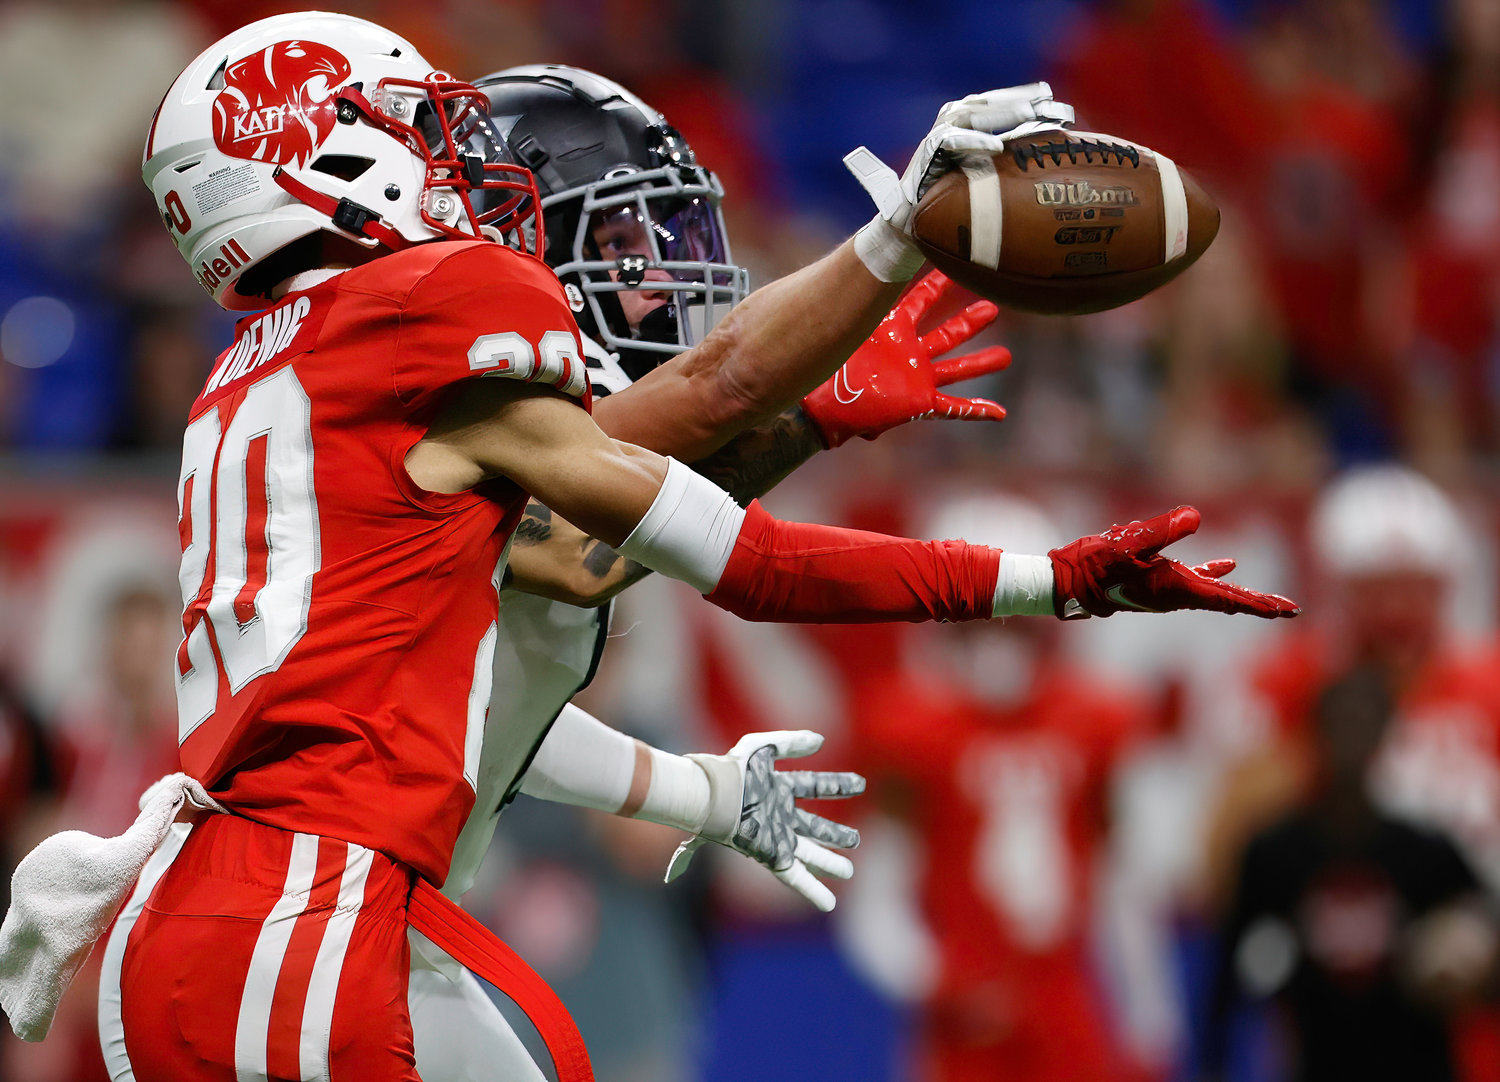 Vandegrift Vipers senior defensive back Isaiah Thompson (15) knocks down a pass intended for Katy wide receiver Micah Koenig (20) during the Class 6A-DII state semifinal football game between Katy and Vandegrift on Dec. 10, 2022 in San Antonio.